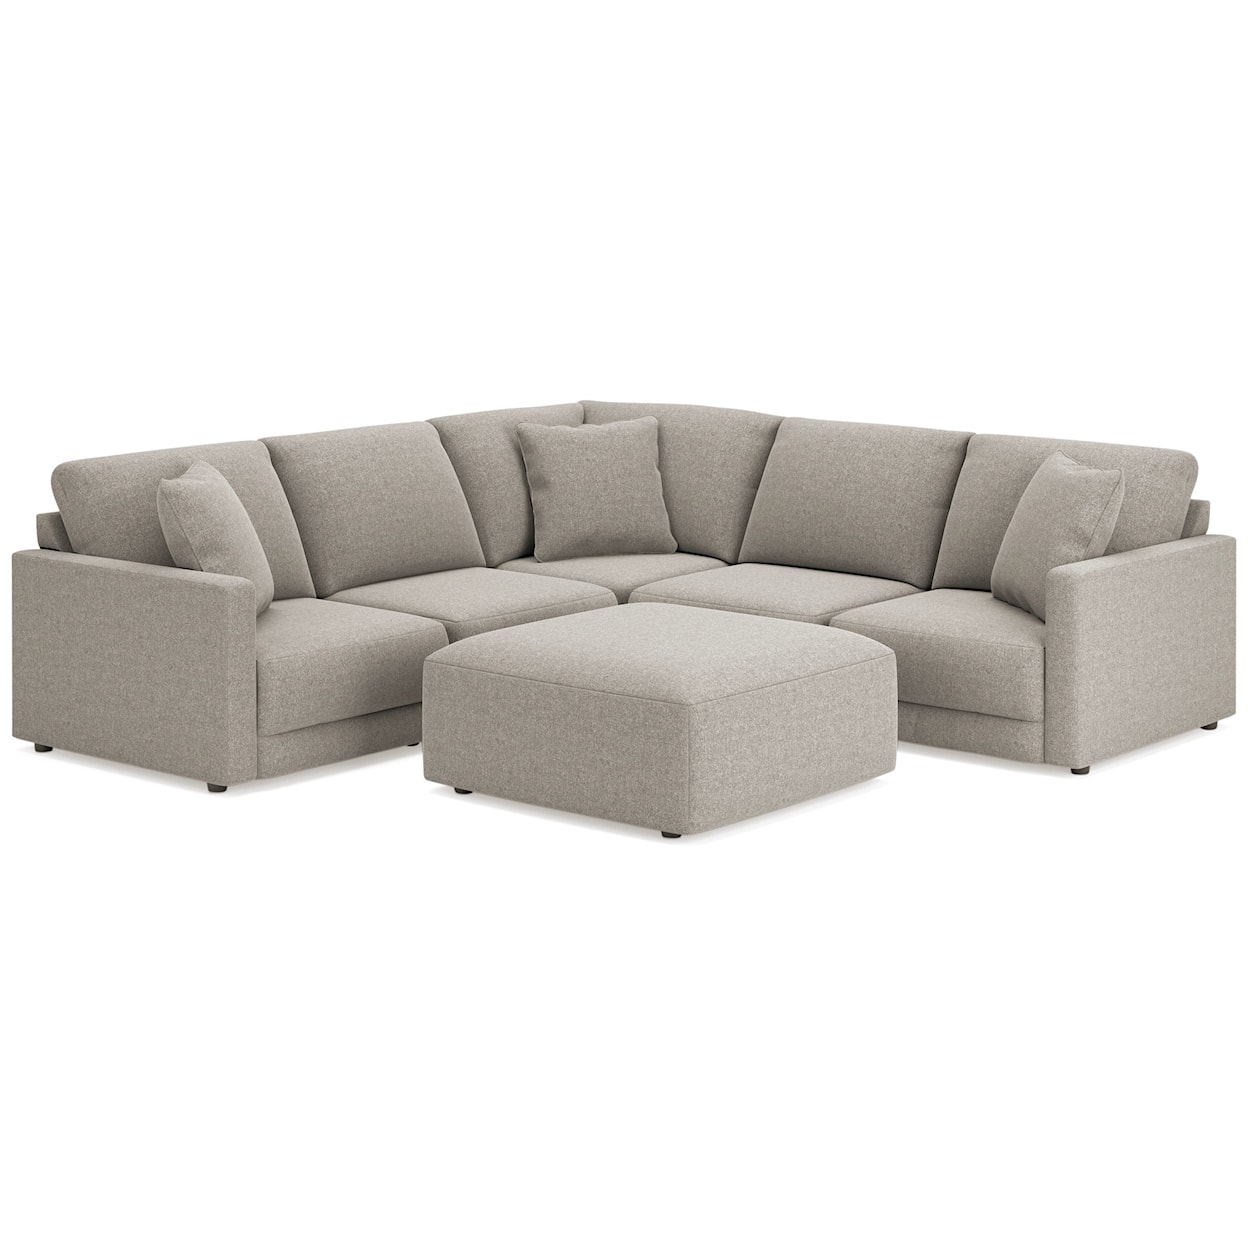 Benchcraft Katany 5-Piece Sectional